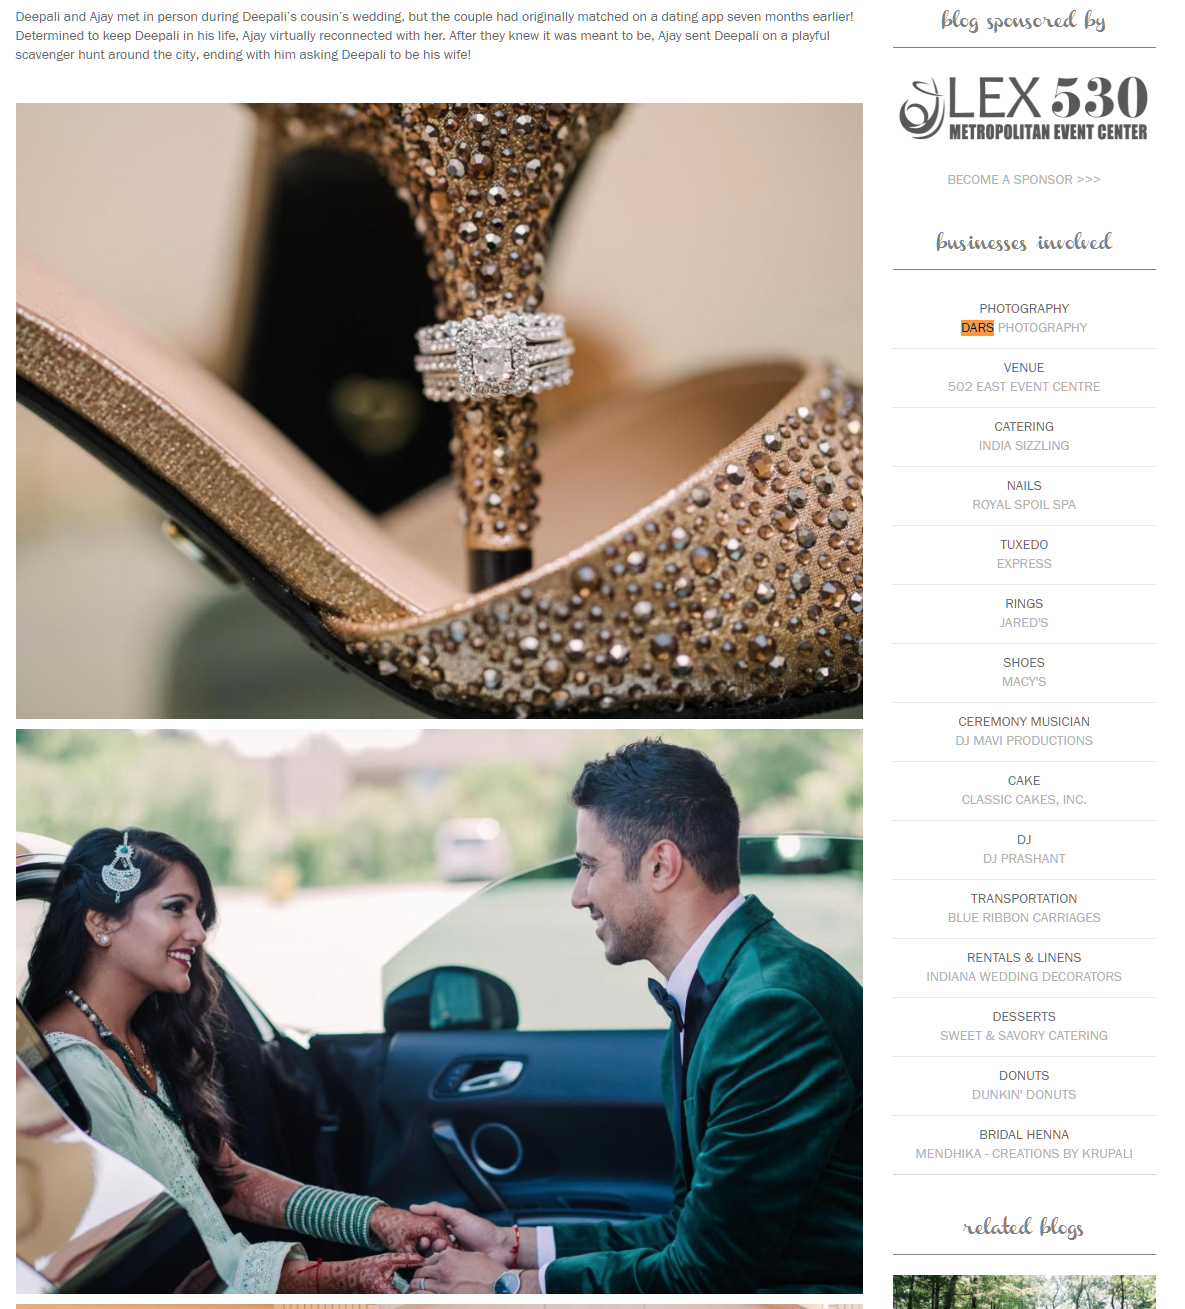 DARS Photography FEATURED BY WEDDING DAY MAGAZINE